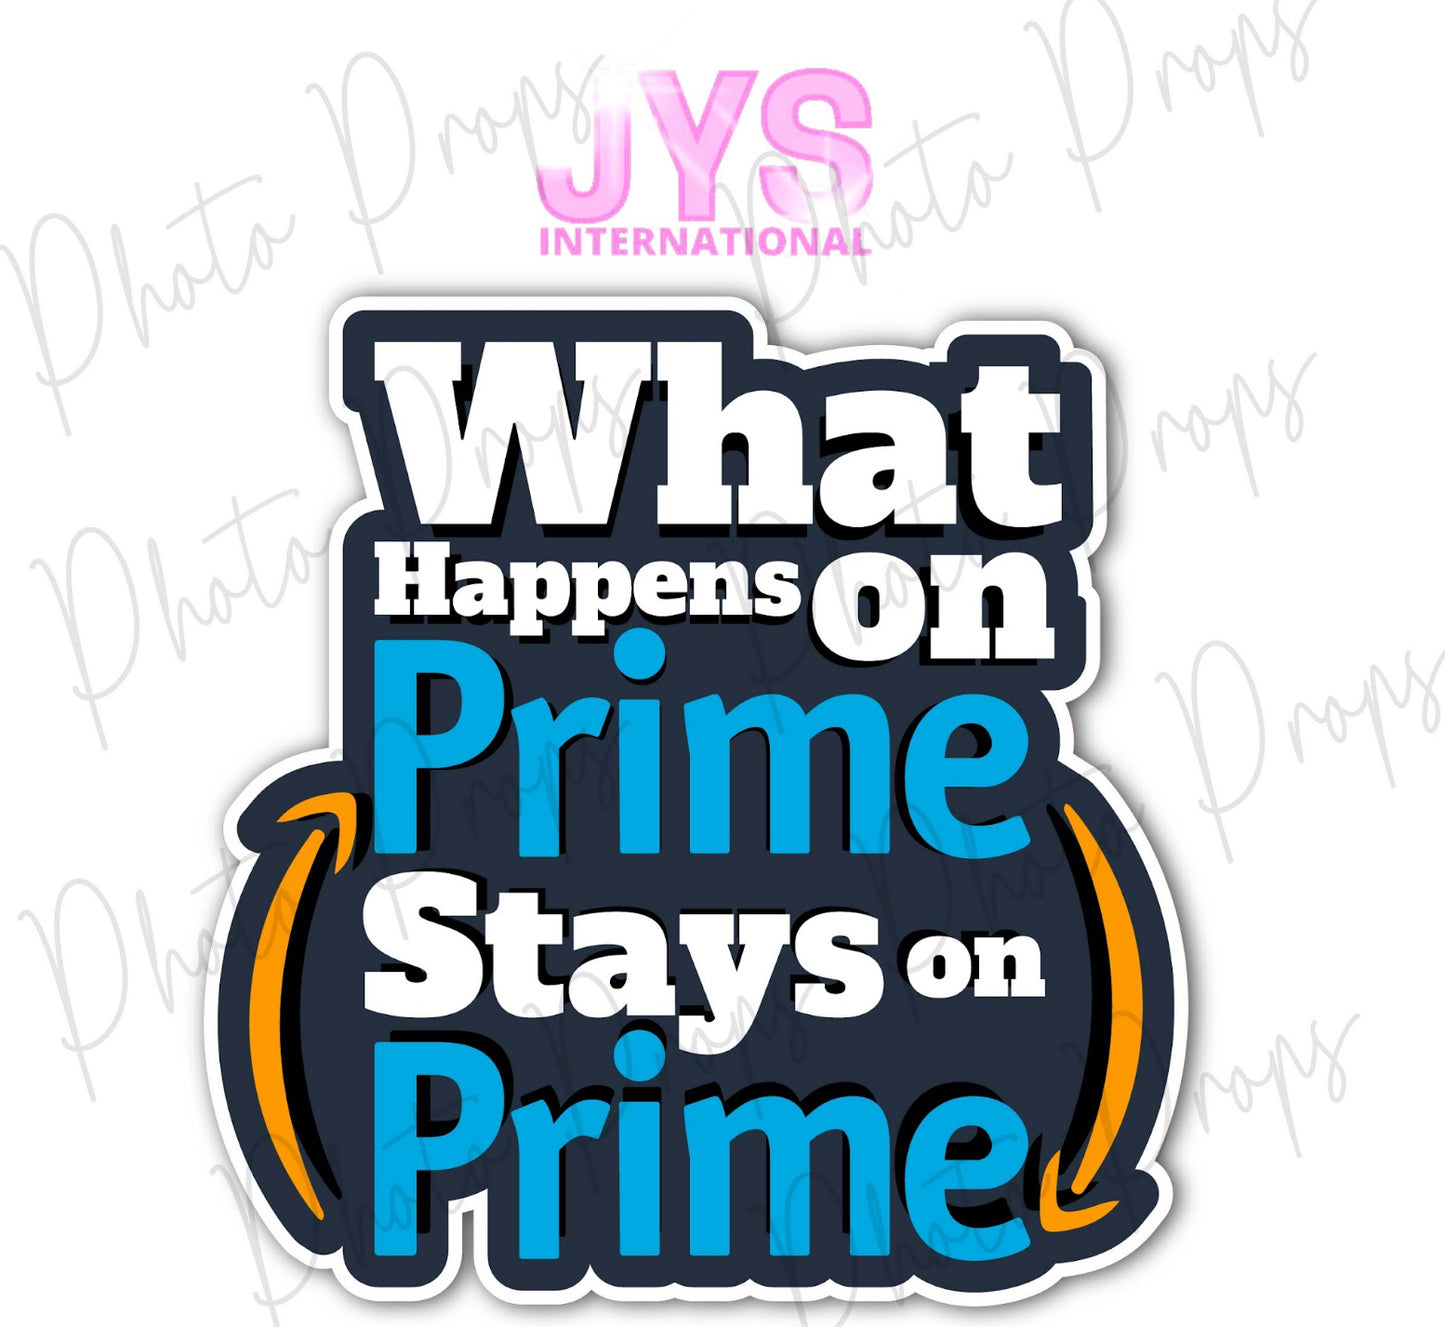 P1335: WHAT HAPPENS ON PRIME